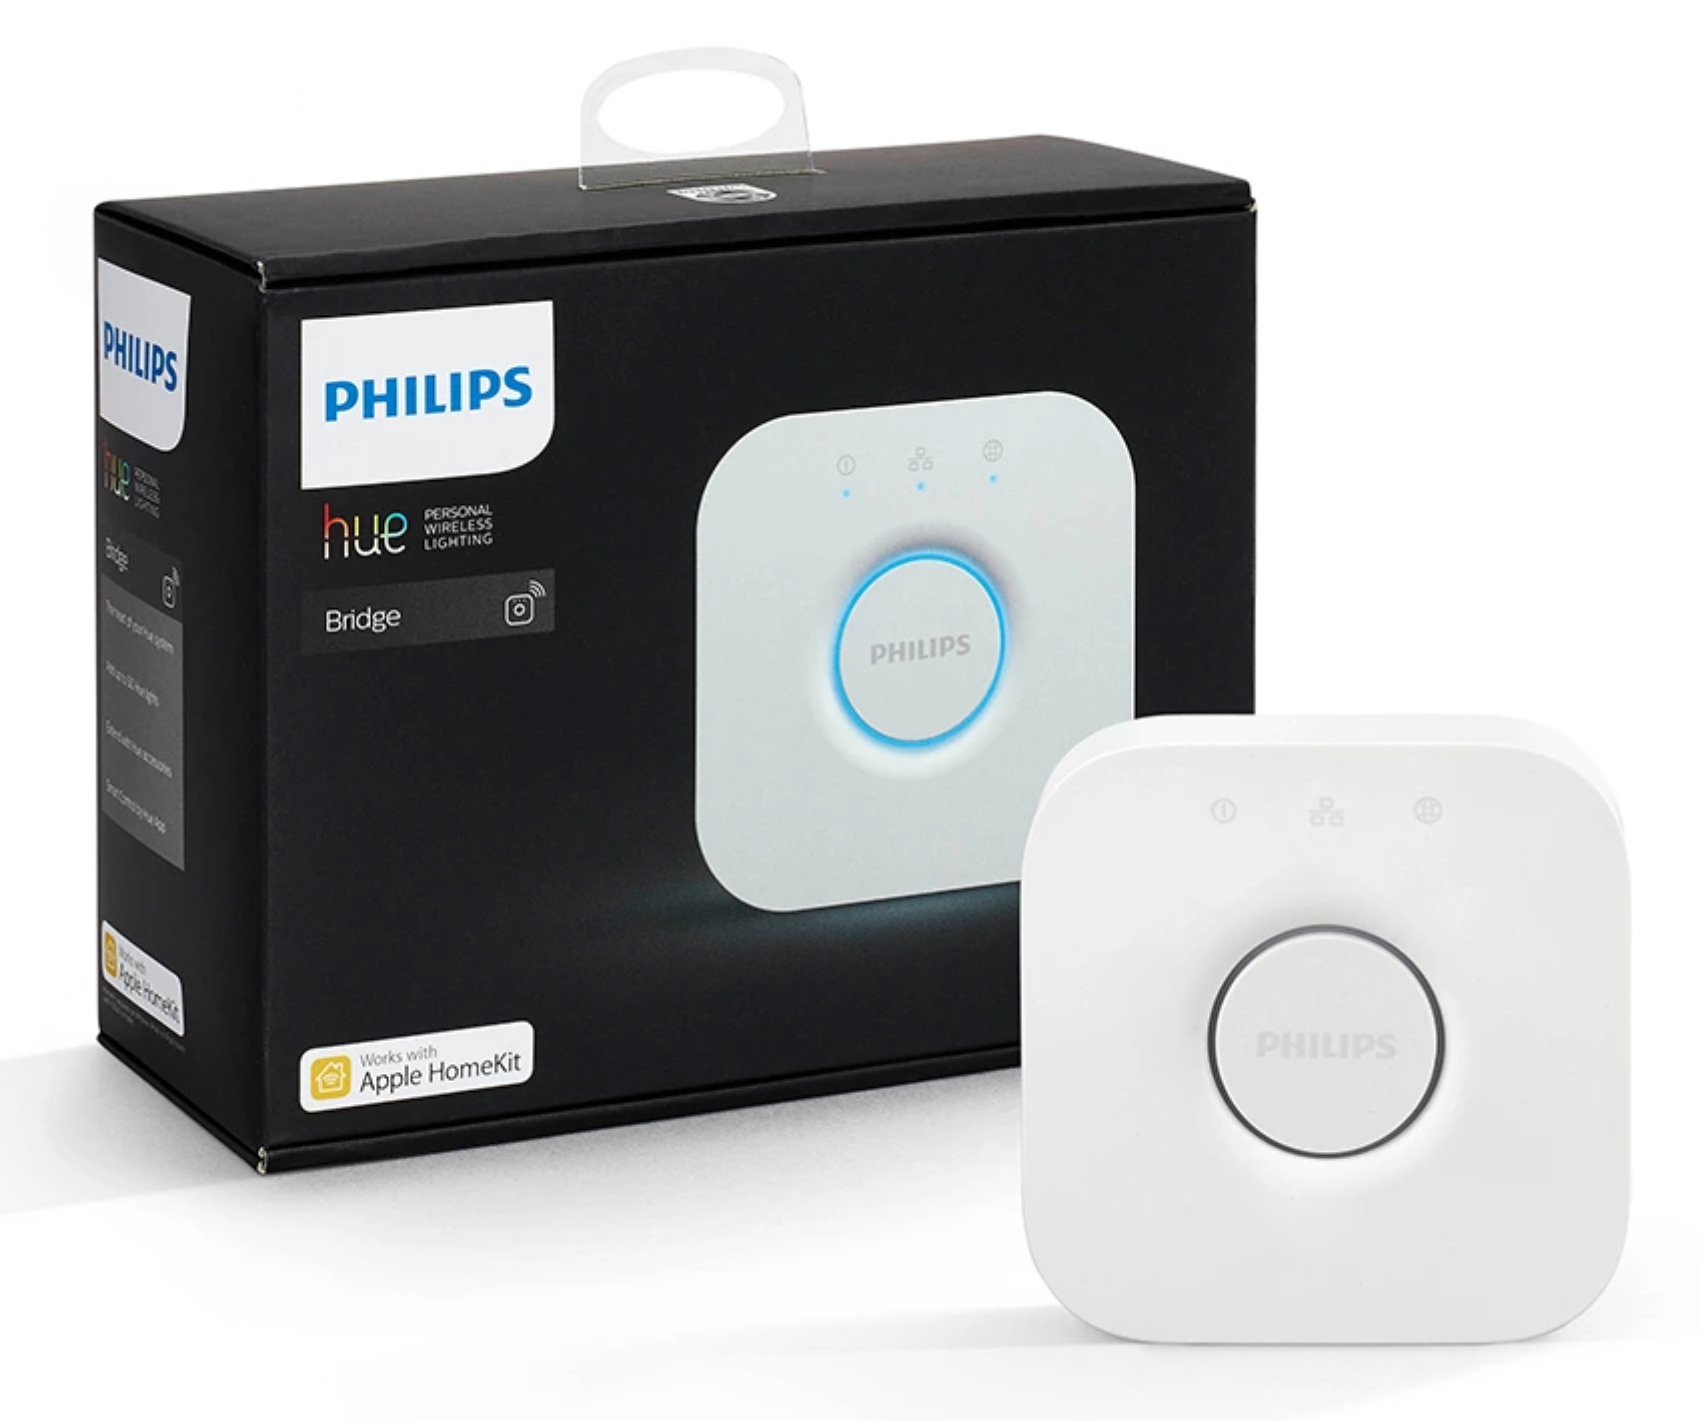 Philips briudge IKEA Takes On Philips With Google Assistant Smart Lights